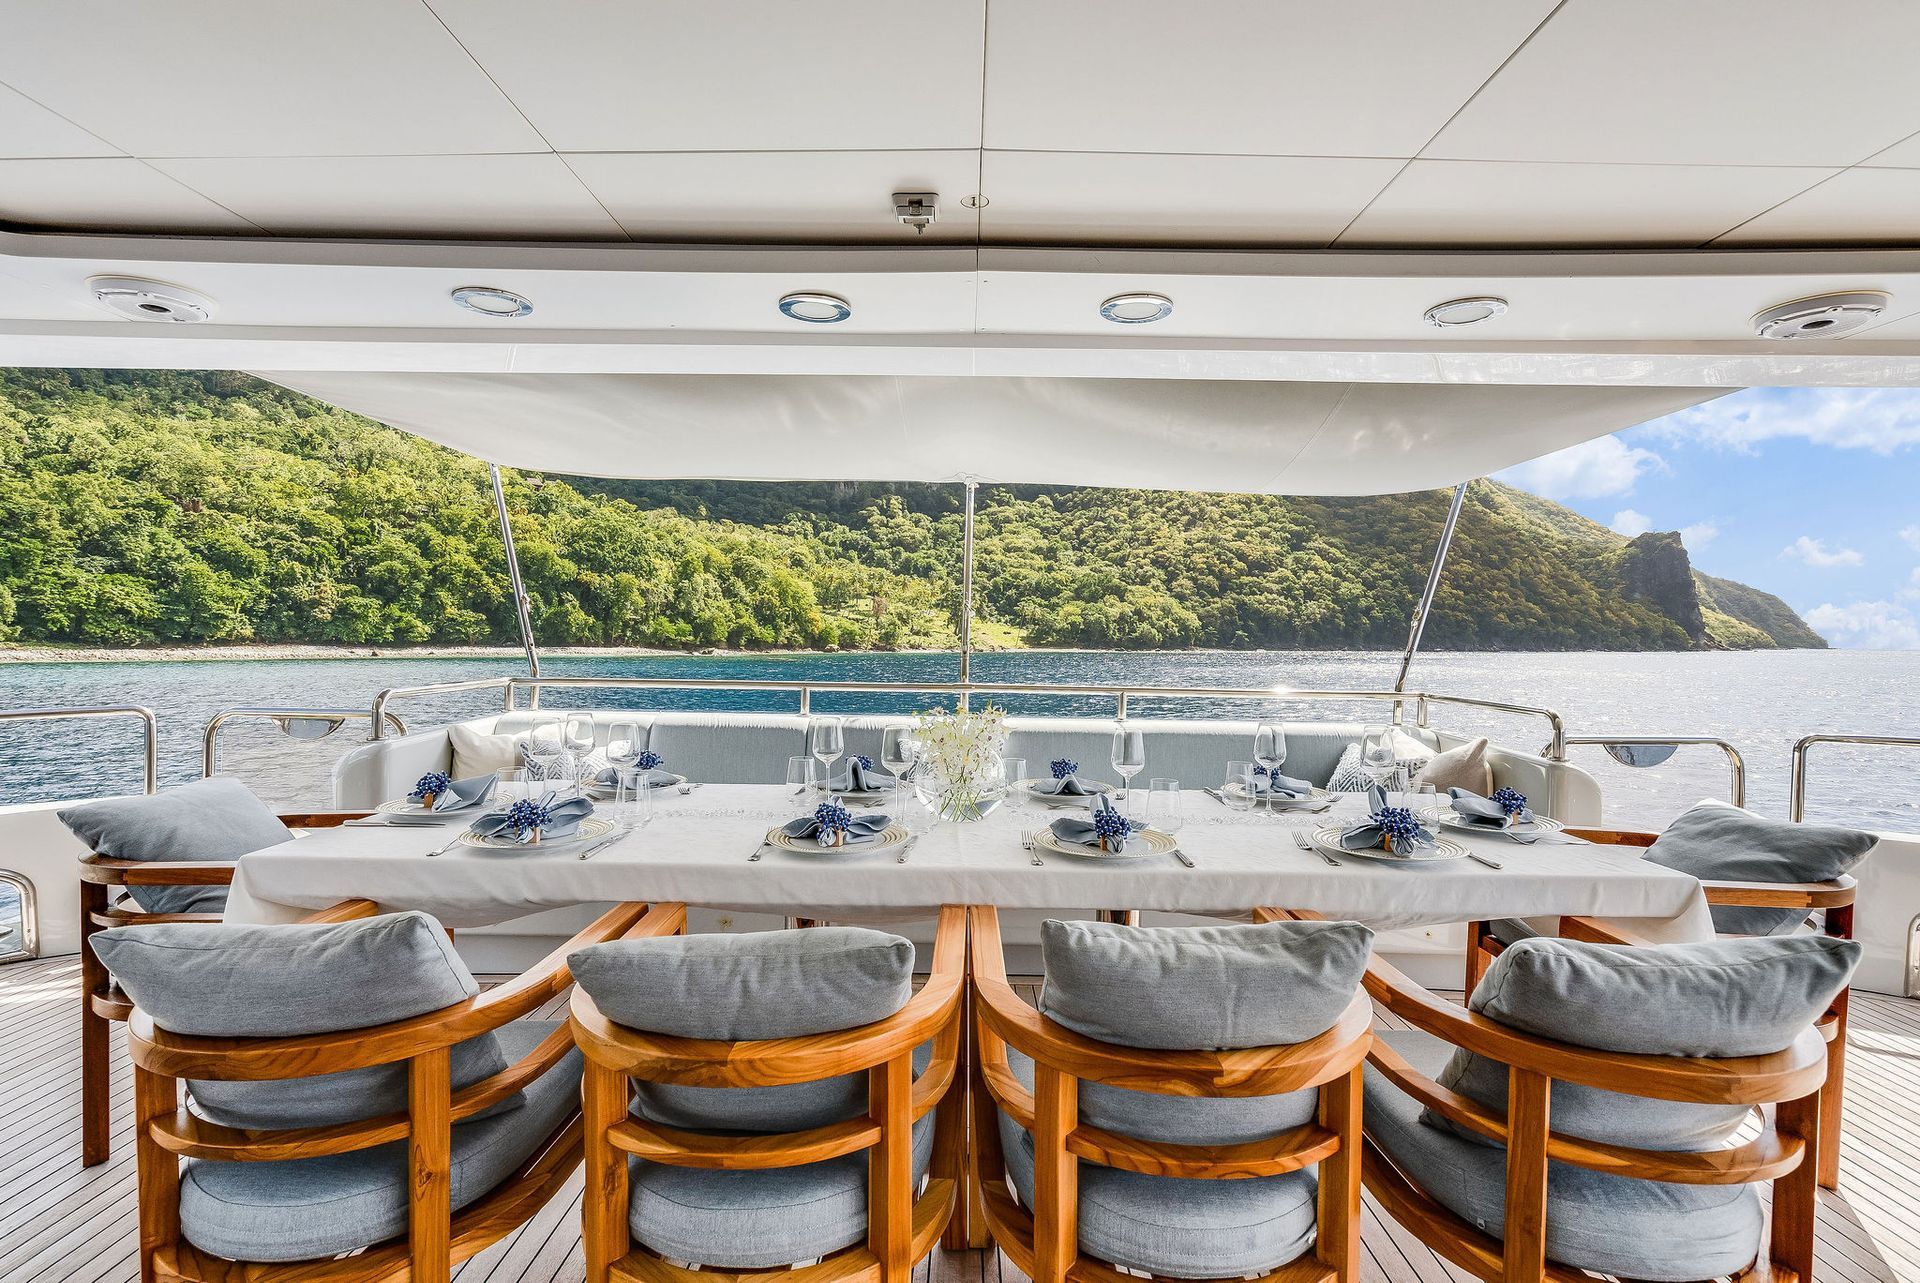 there is a large table and chairs on the deck of a yacht